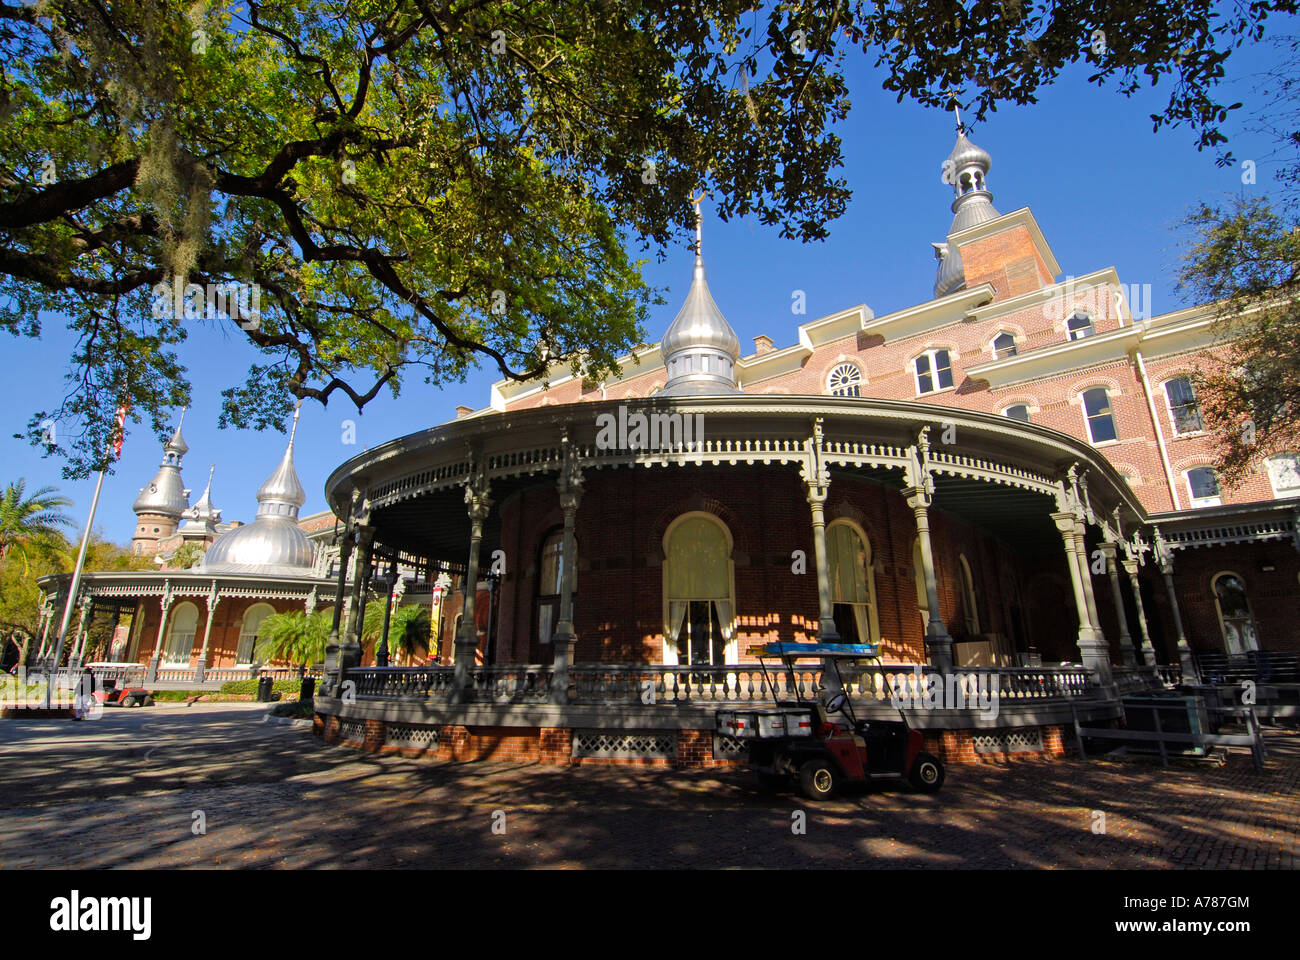 Henry B Plant Hall is the main building on the campus of the University of Tampa located in the  city of Tampa Florida FL Stock Photo